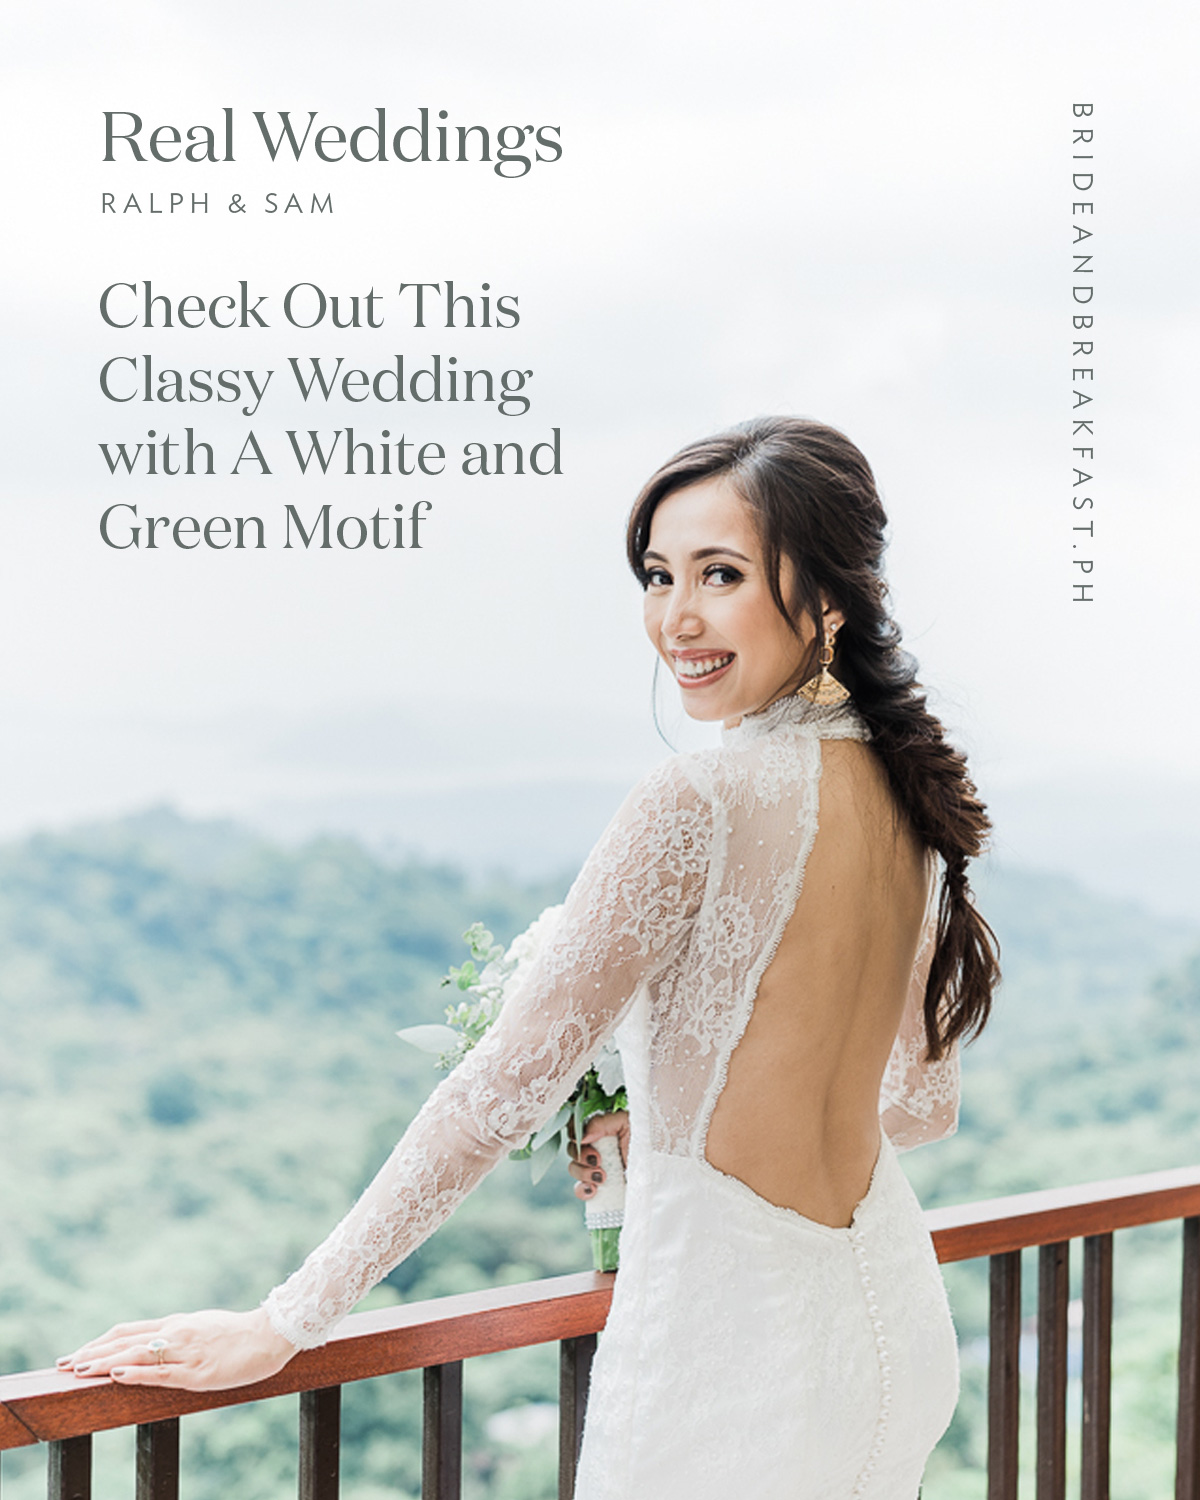 Check Out This Classy Wedding with A White and Green Motif